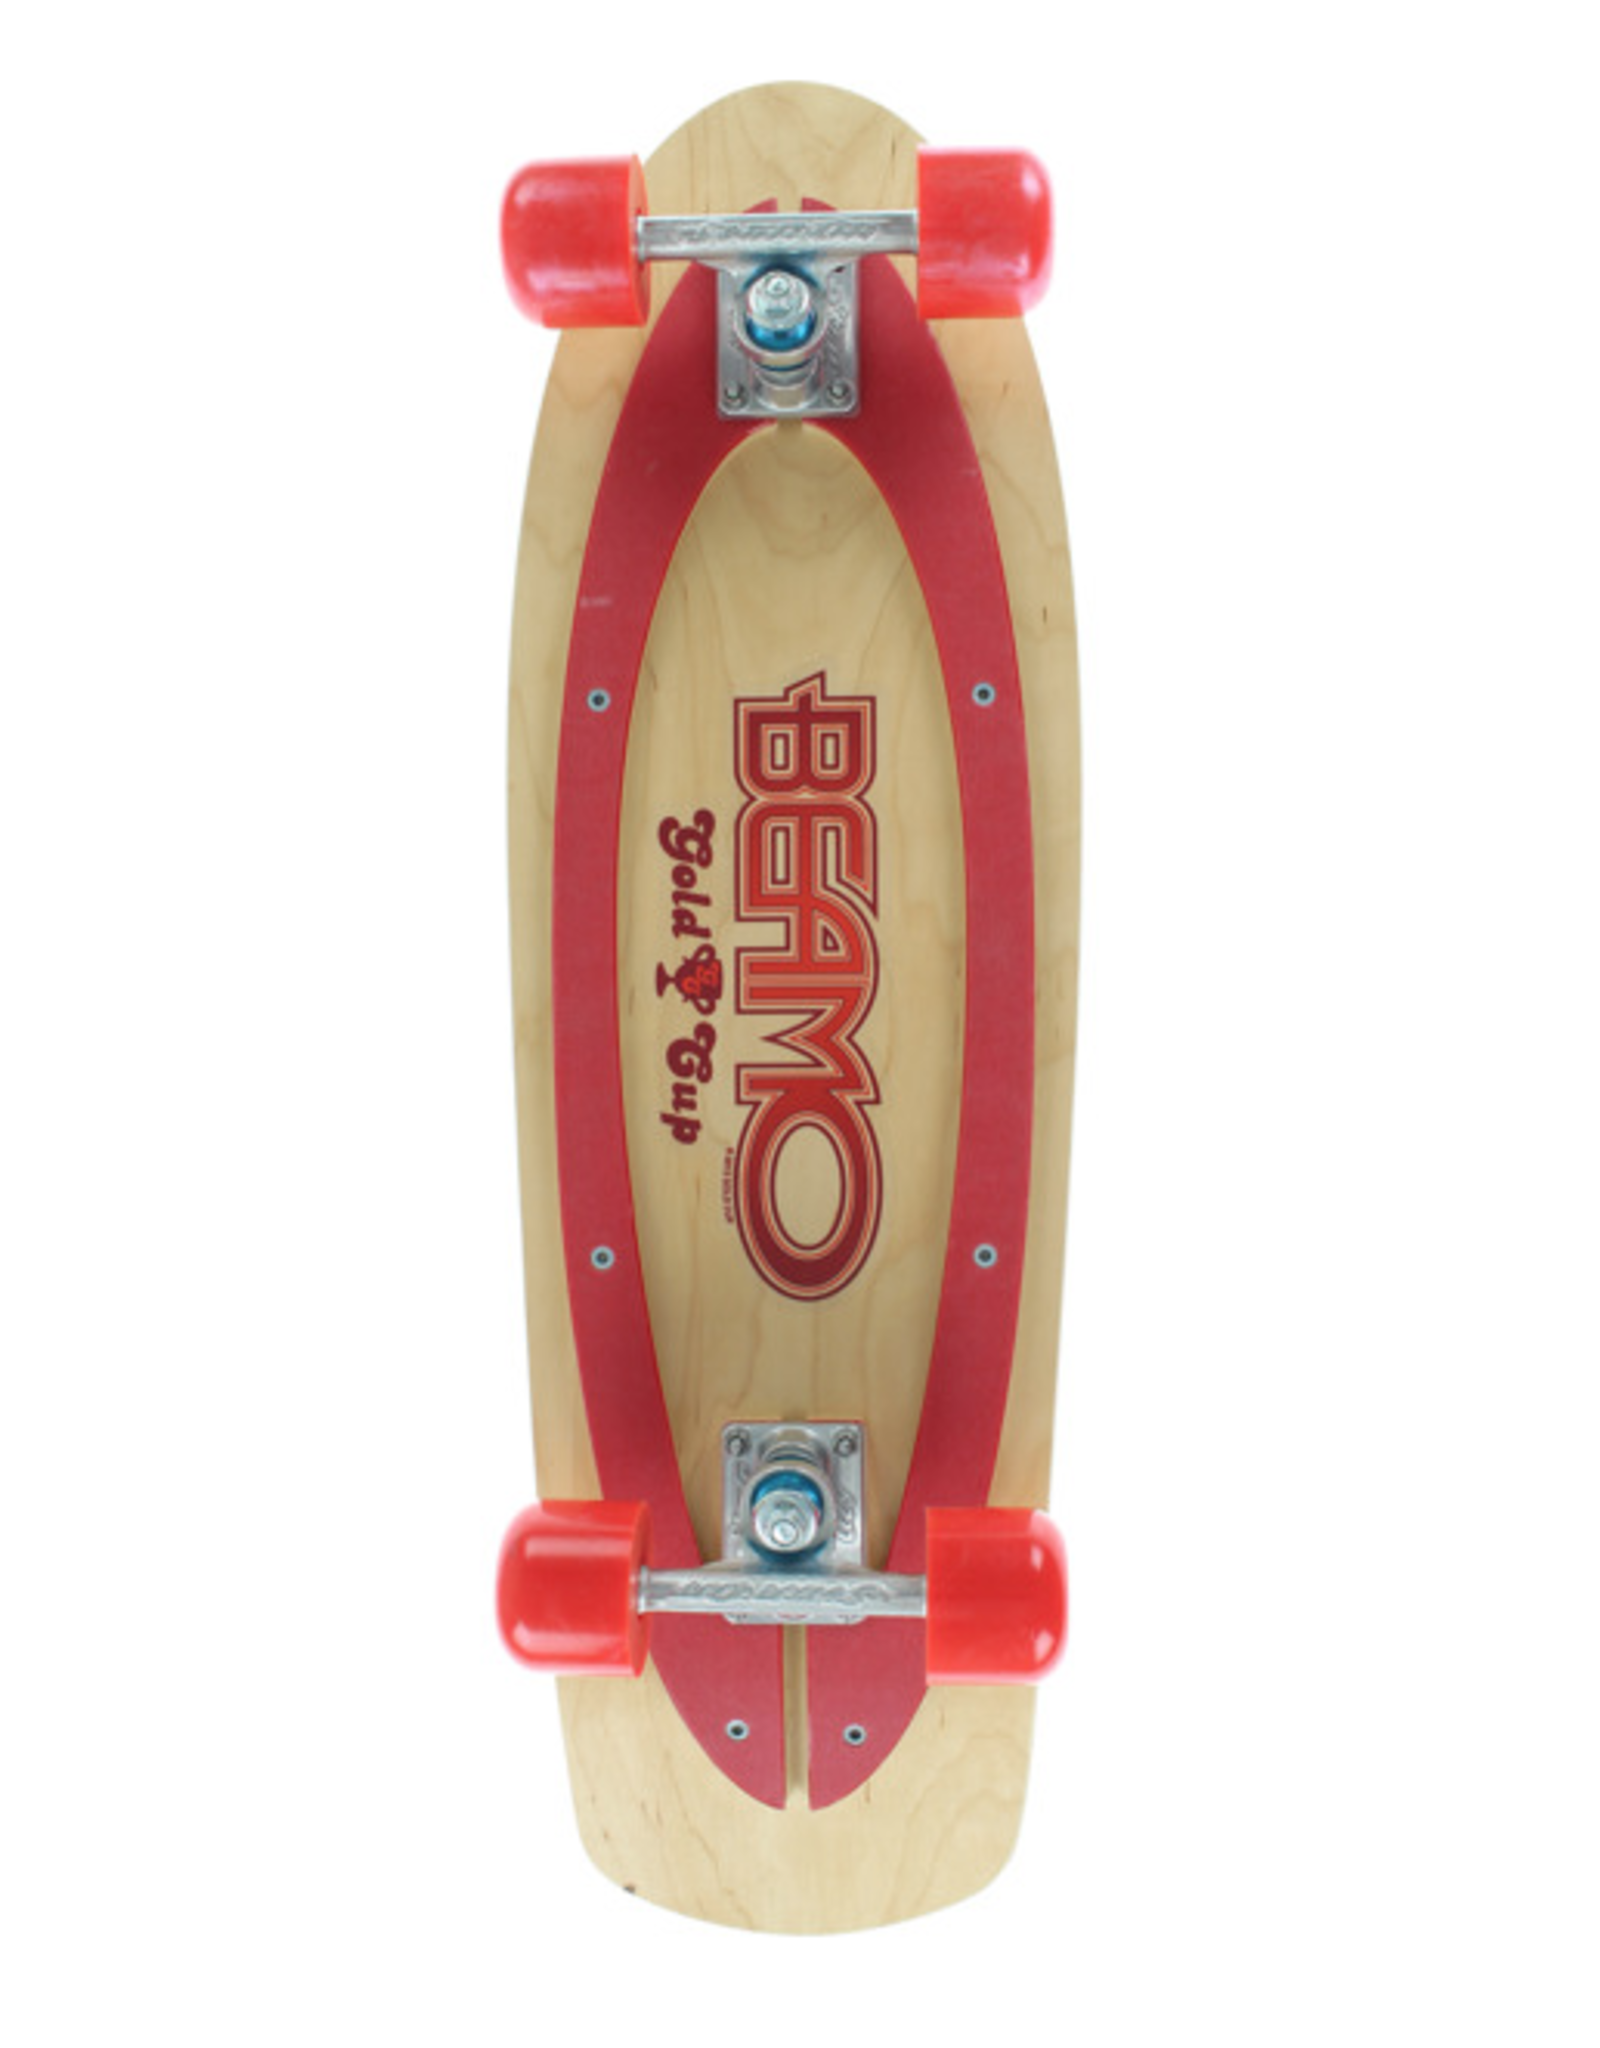 EASTERN SKATE GOLD CUP BEAMO COMPLETE-9X30 NAT/RED